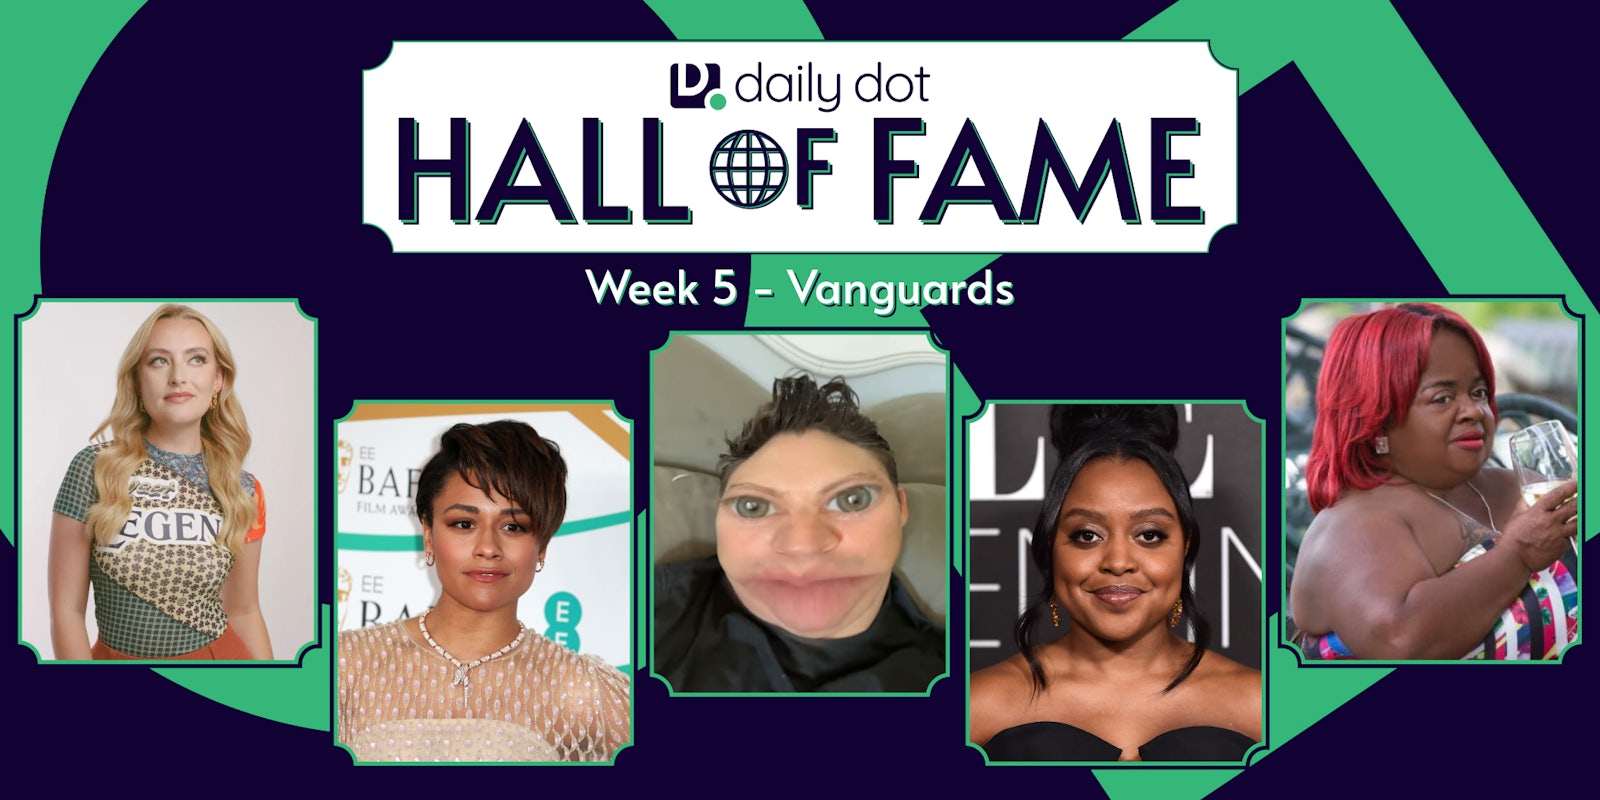 Daily Dot Hall of Fame Week 5